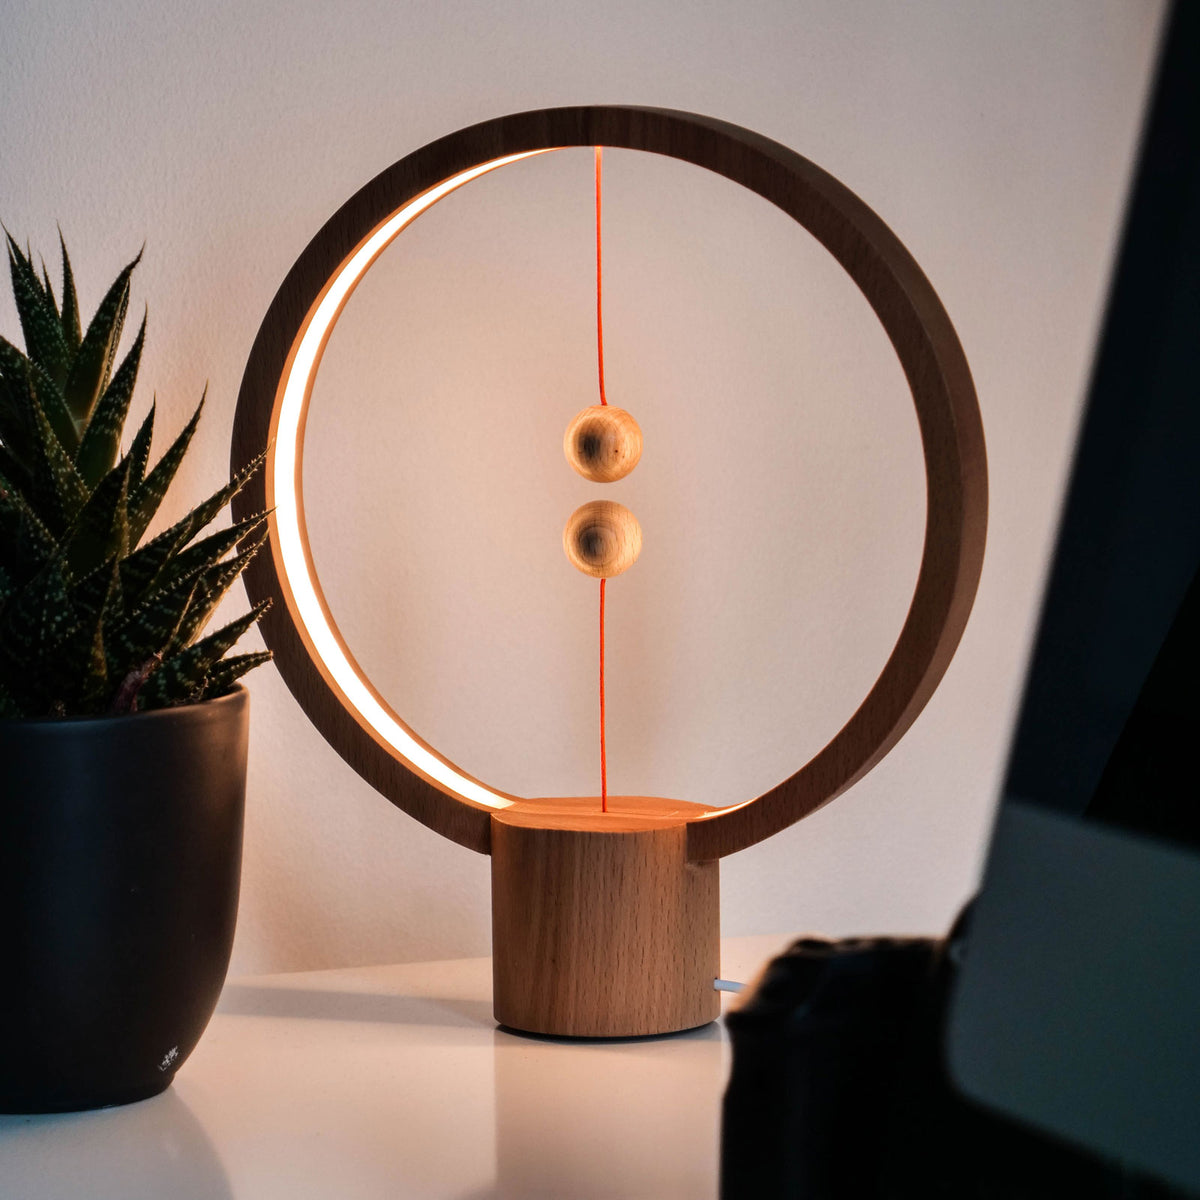 The Heng Round Light Wood lighting a table.